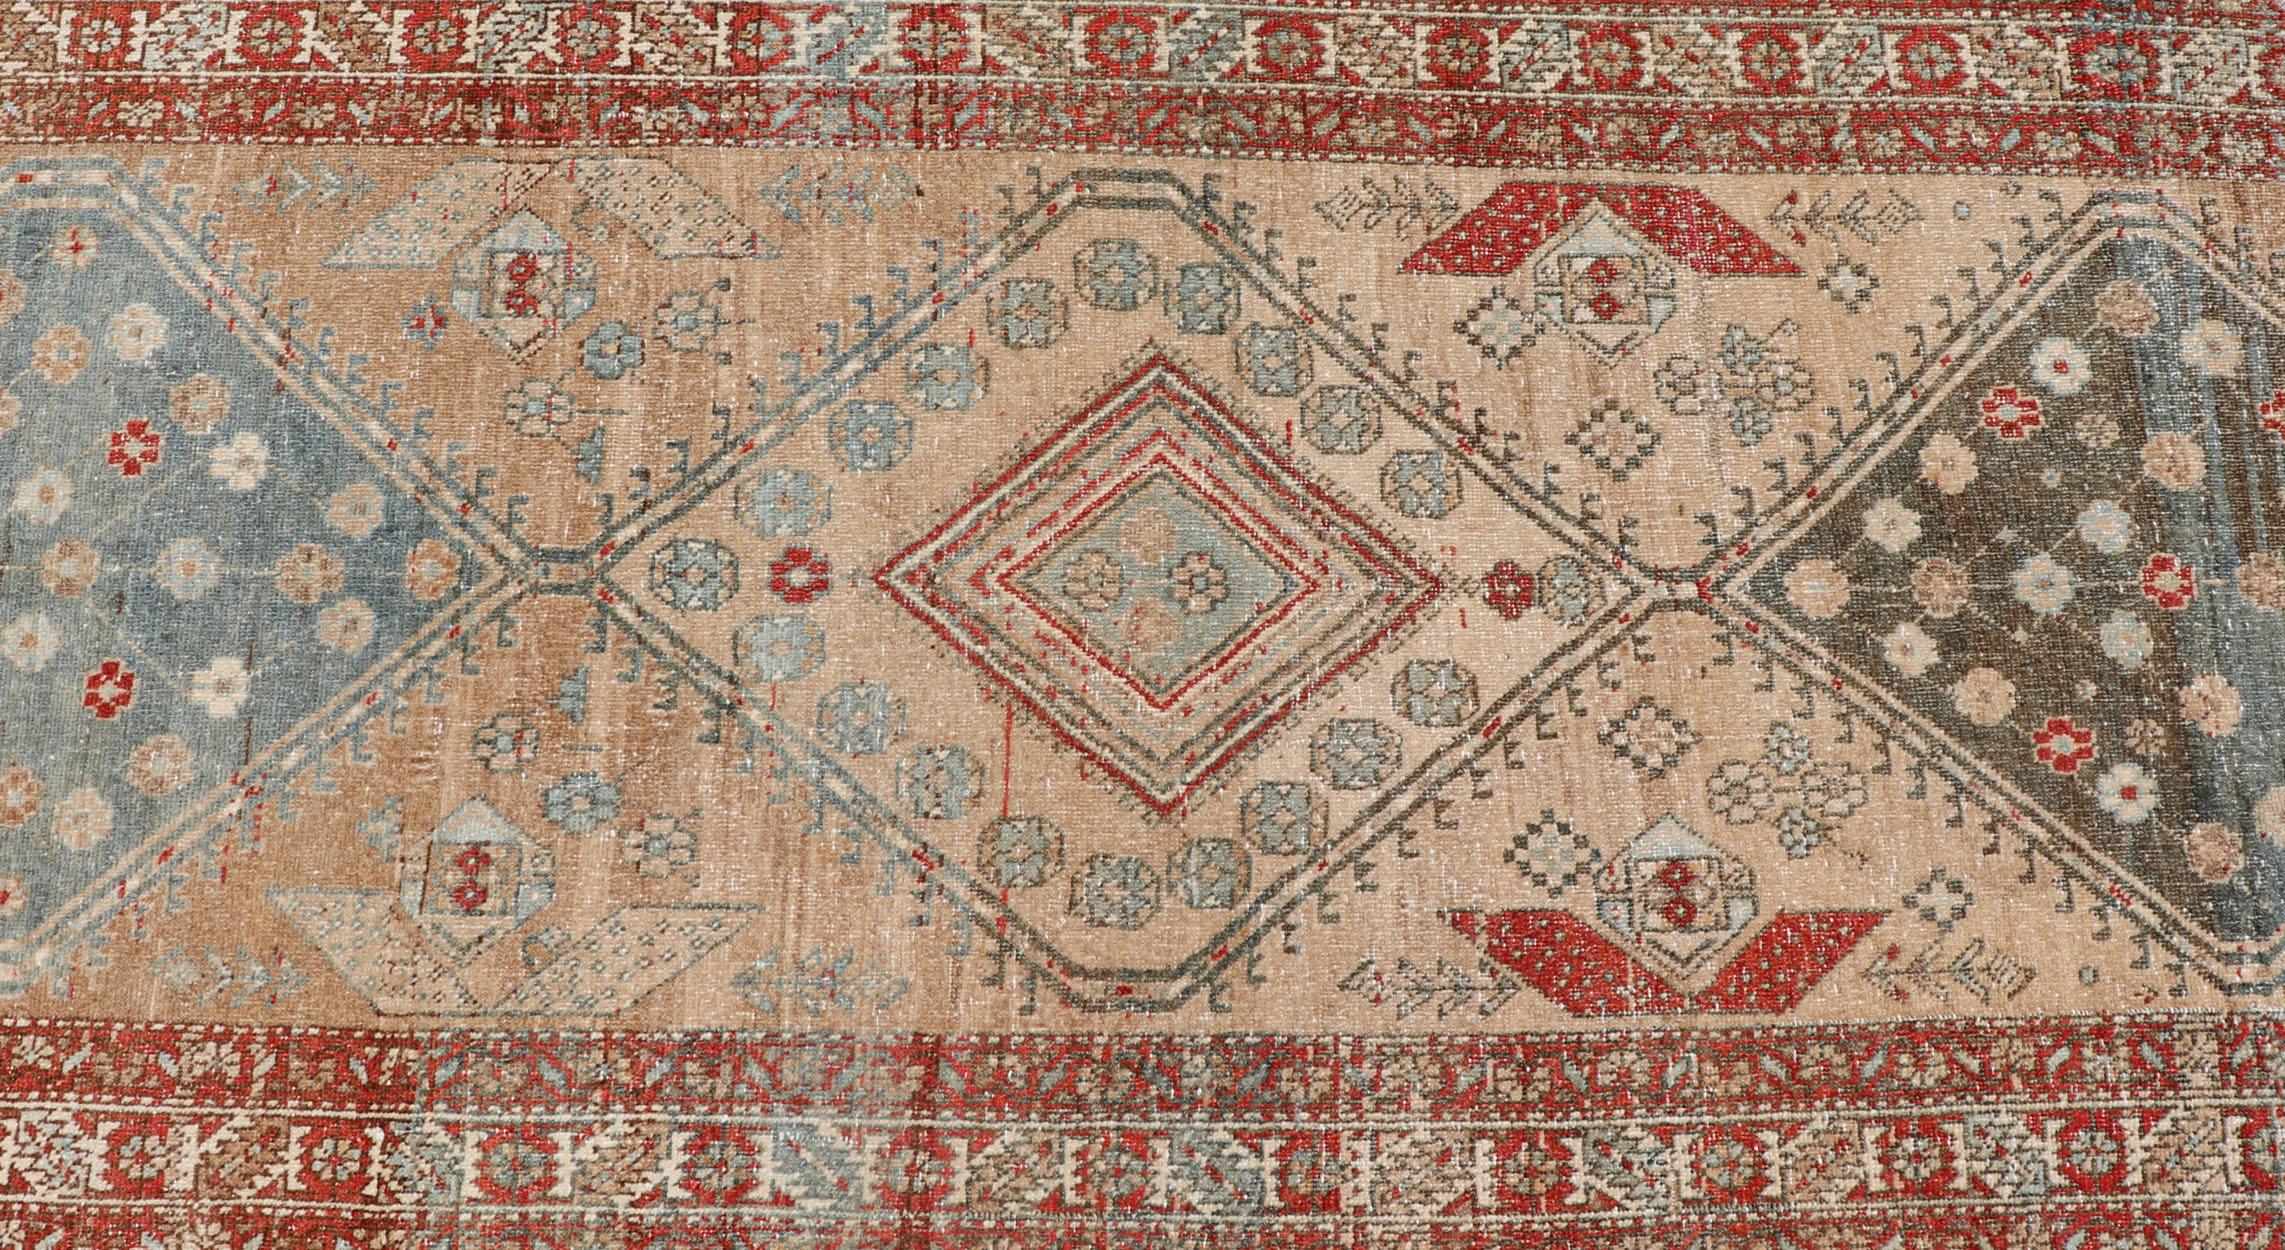 Antique Persian Serab Runner with Geometric Medallion Design in Red and Tan In Good Condition For Sale In Atlanta, GA